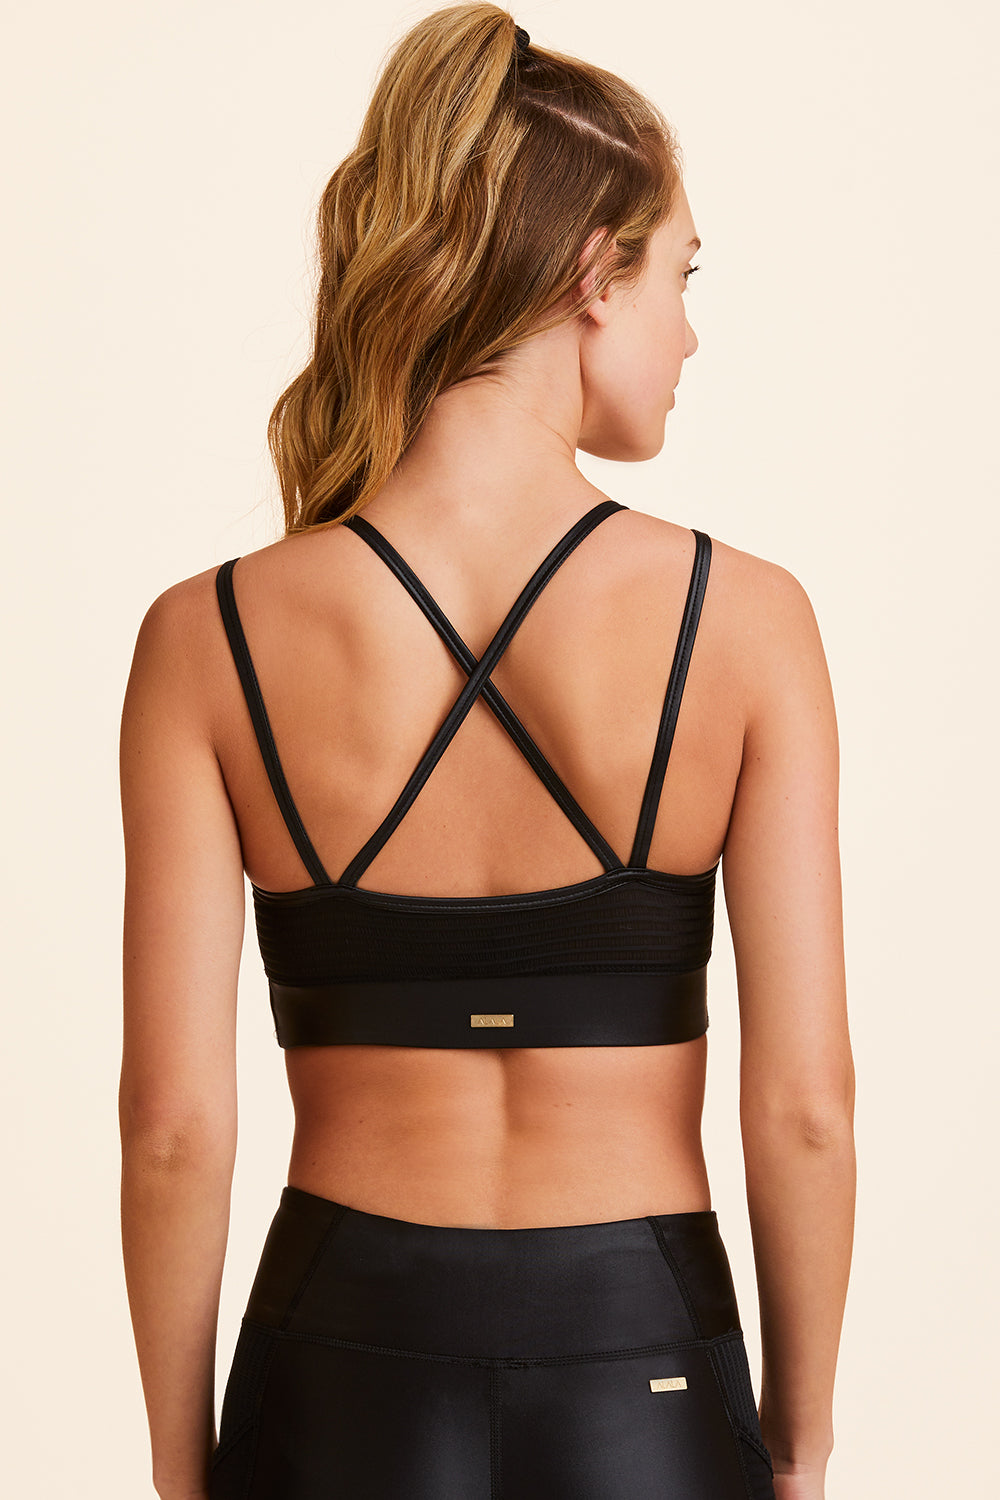 Back view of Alala Women's Luxury Athleisure black sports bra with double straps